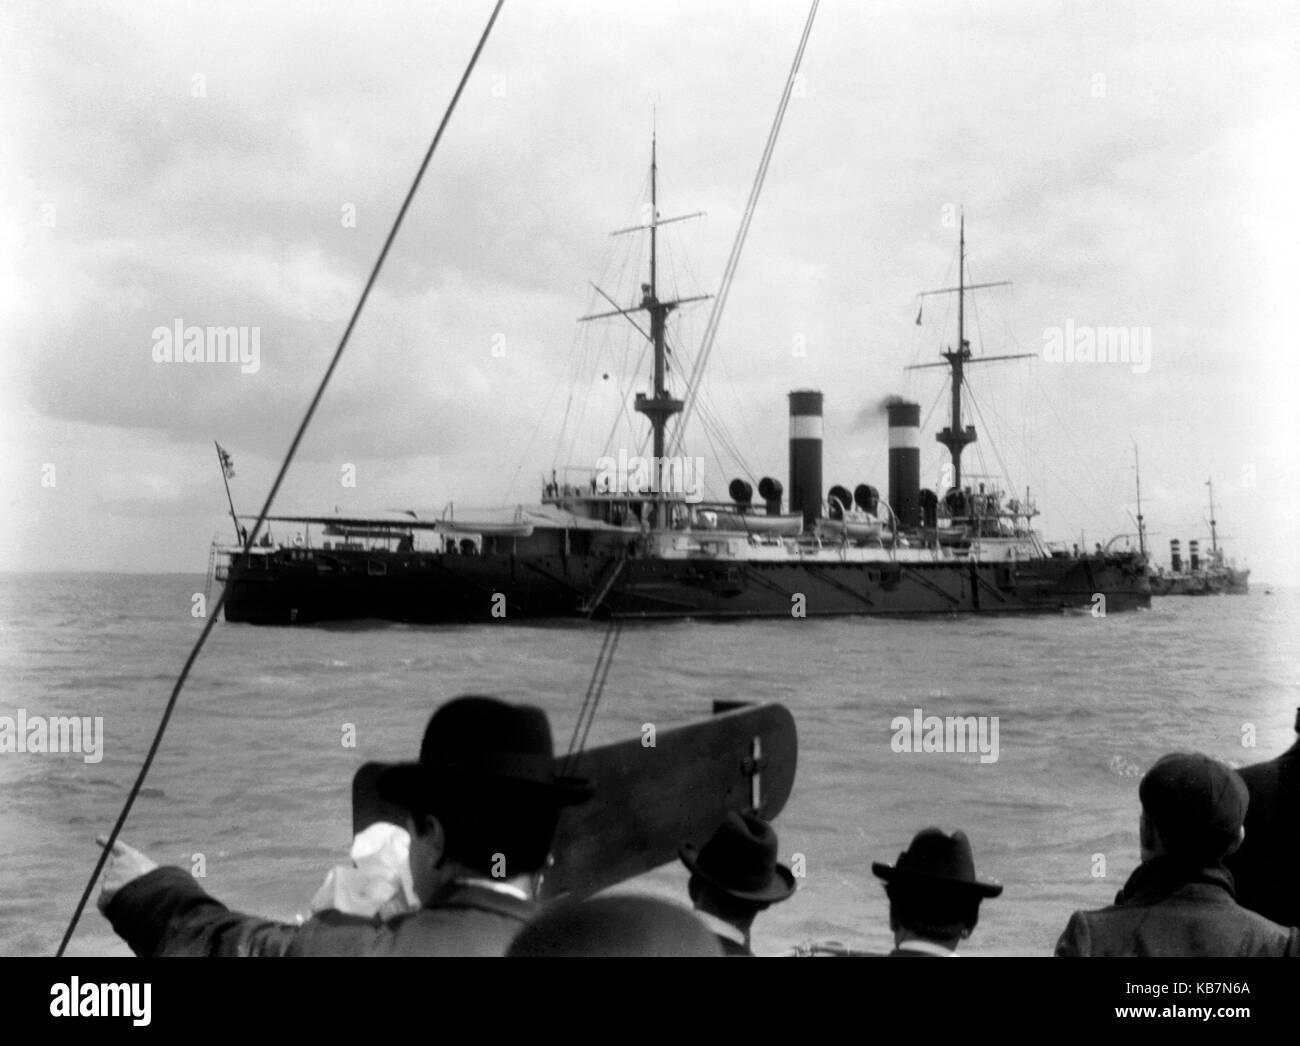 AJAXNETPHOTO. 1903. PORTSMOUTH, ENGLAND. - JAPAN WARSHIP VISIT - AN UNKNOWN JAPANESE WARSHIP CRUISER SEEN FROM A TRIPPER BOAT IN THE SOLENT. PHOTOGRAPHER:UNKNOWN © DIGITAL IMAGE COPYRIGHT AJAX VINTAGE PICTURE LIBRARY SOURCE: AJAX VINTAGE PICTURE LIBRARY COLLECTION REF:AVL 0673 Stock Photo